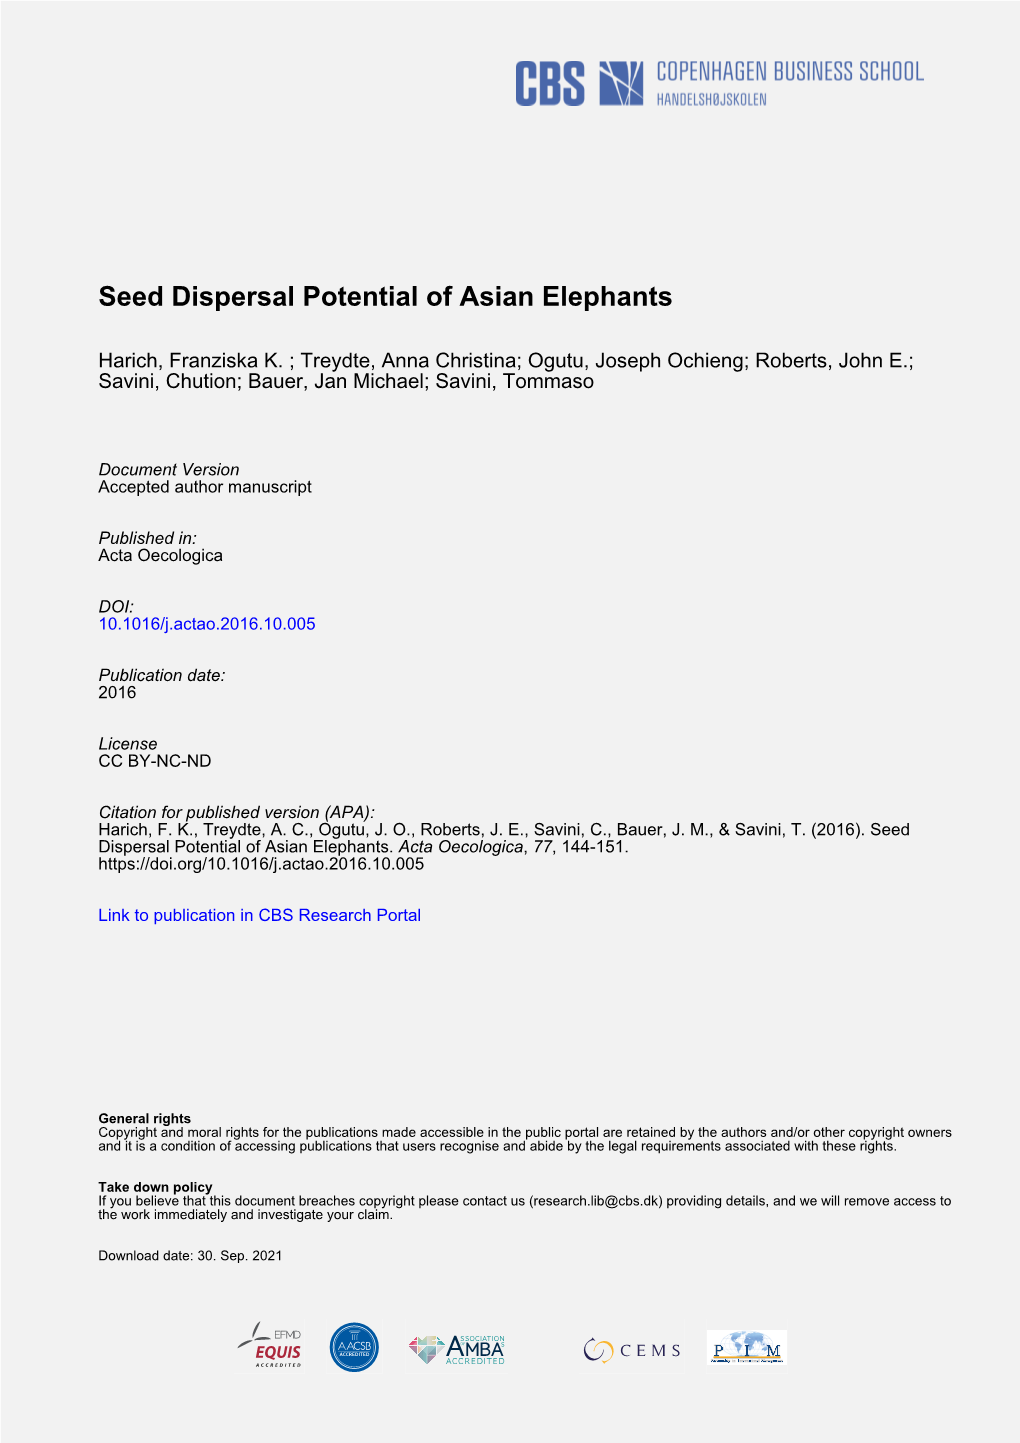 Seed Dispersal Potential of Asian Elephants